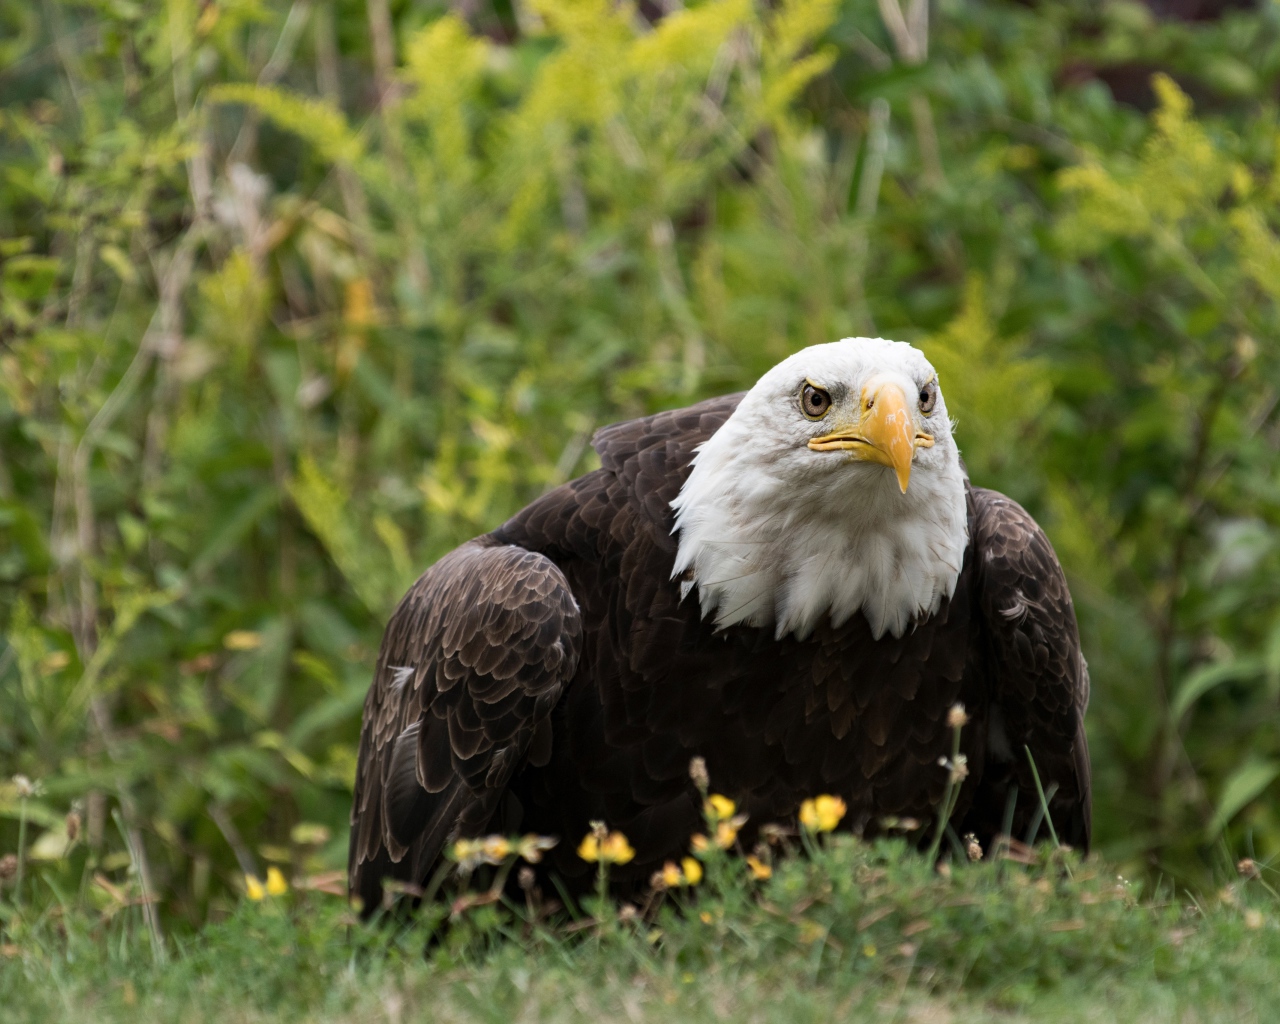 A large predatory bald eagle sits in the grass.